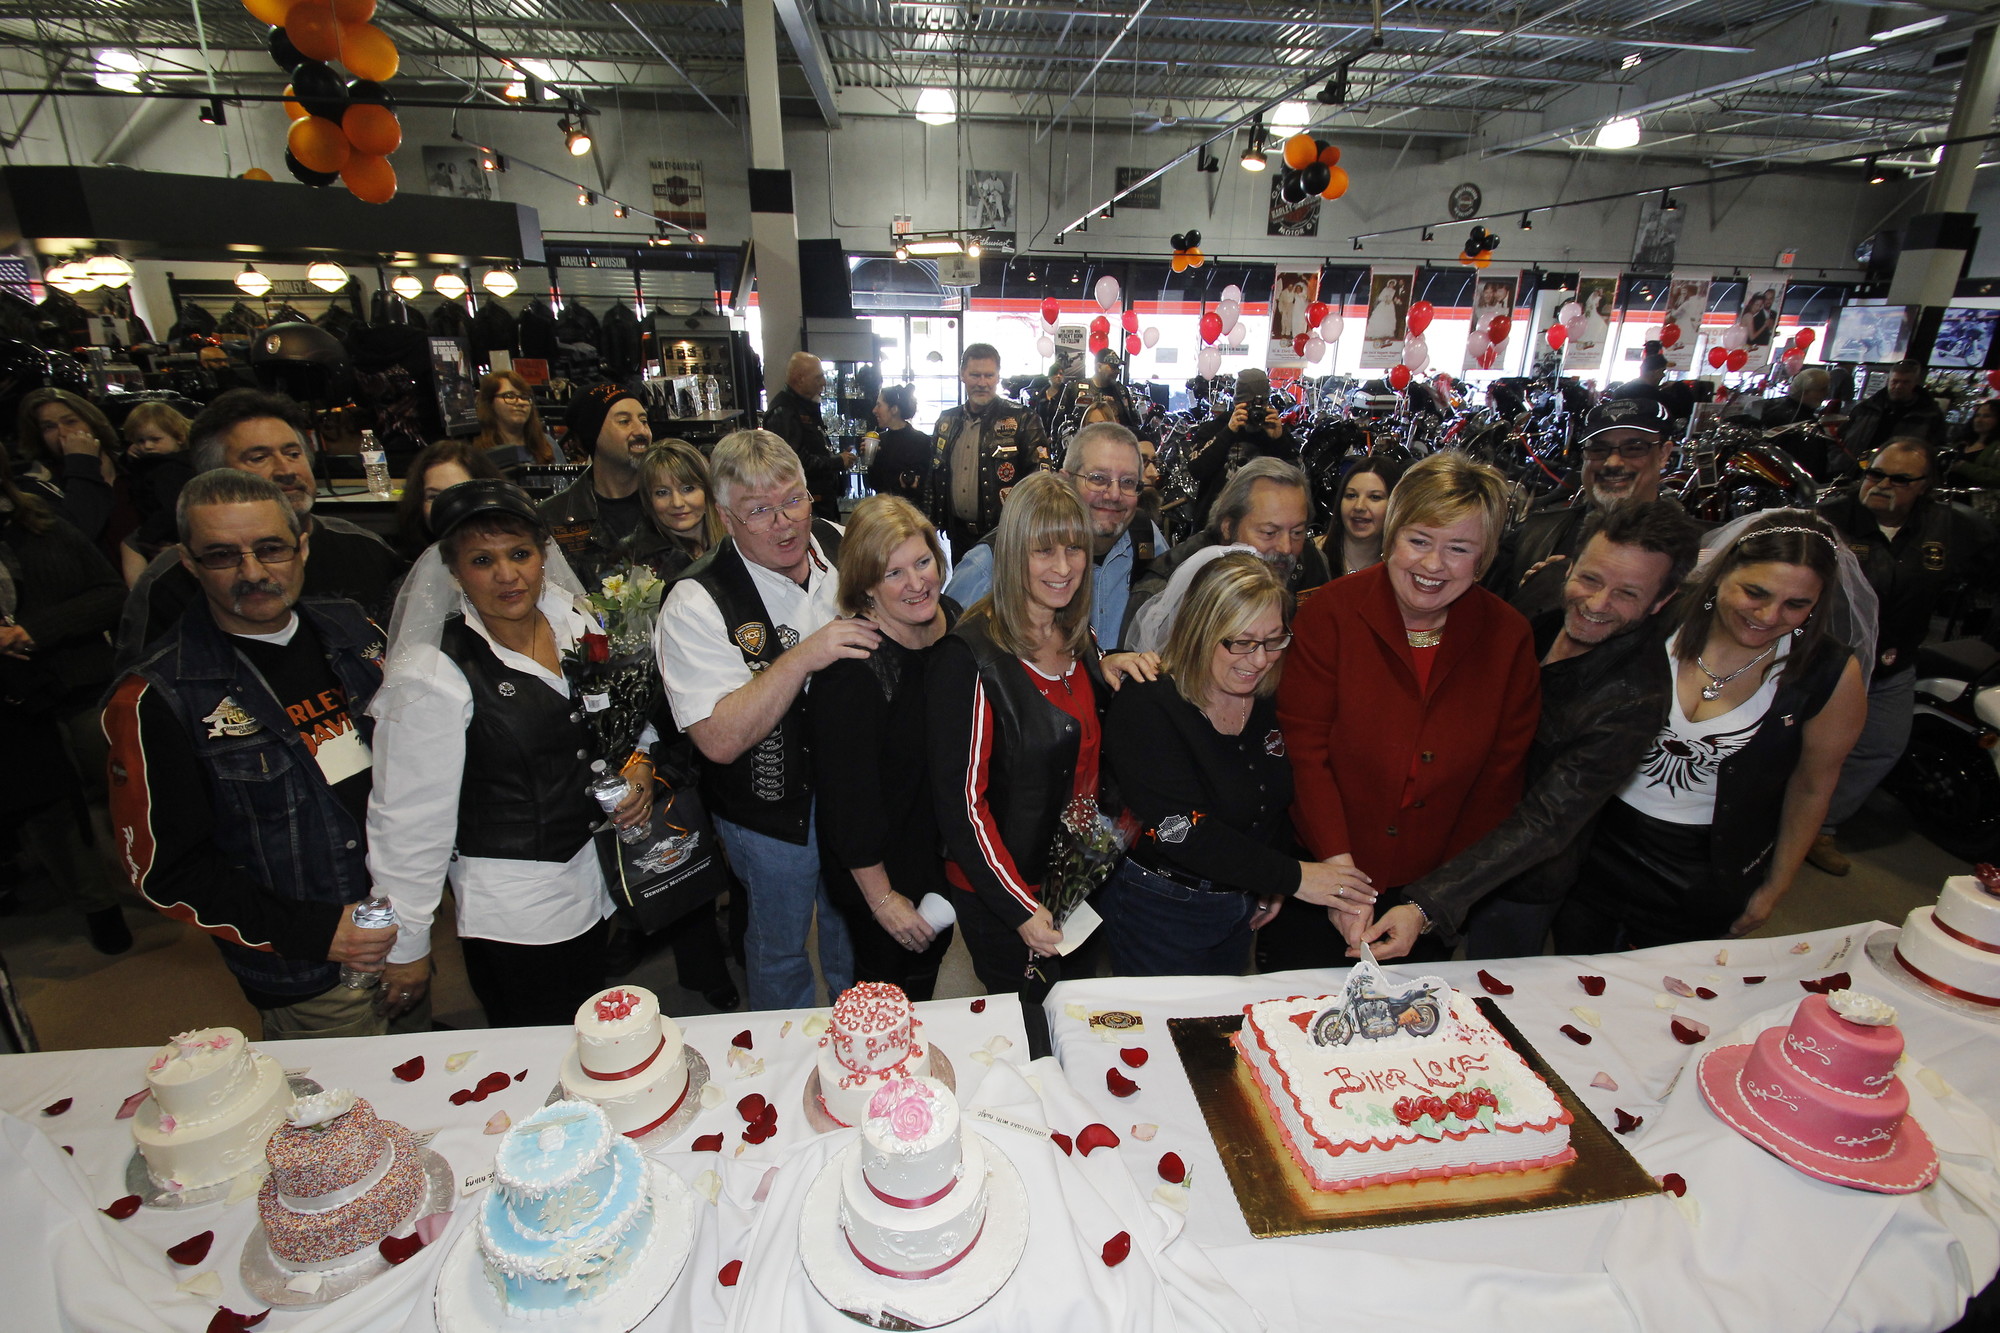 Town of Hempstead officials joined the staff of Harley-Davidson of Nassau County, in Bellmore, to create a memorable wedding-vows-renewal ceremony on Feb. 13.